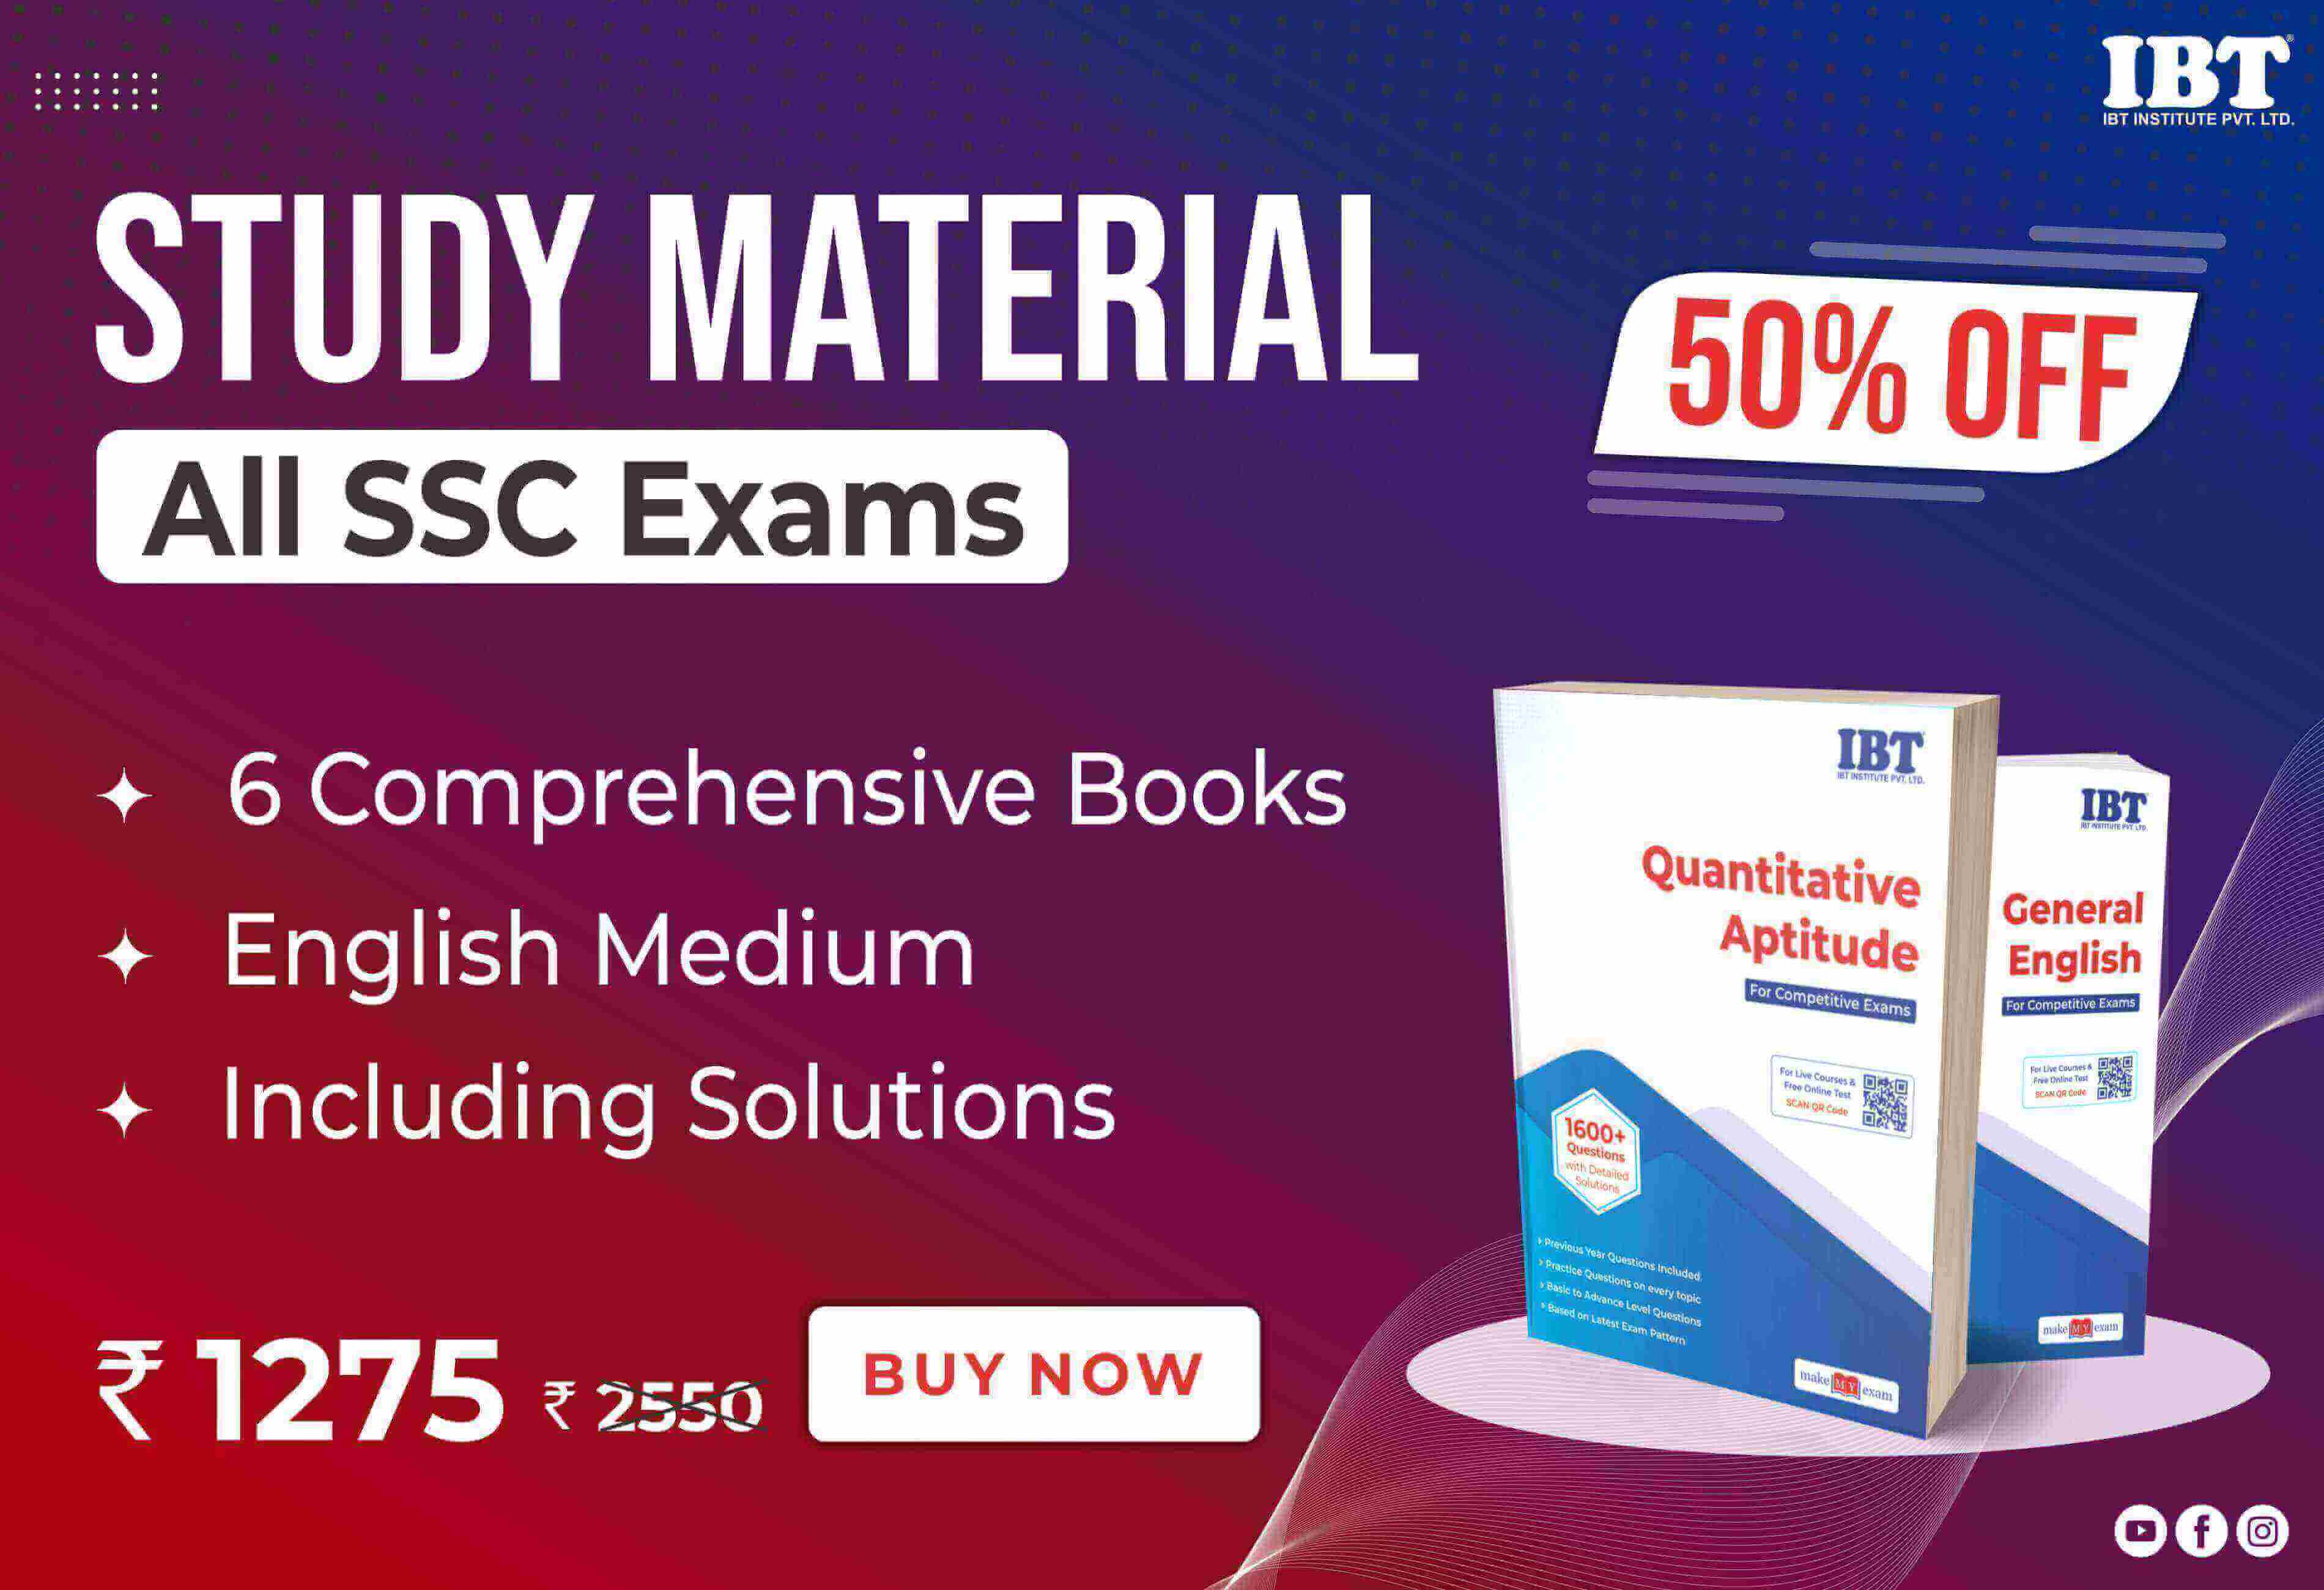 All SSC Exam Material